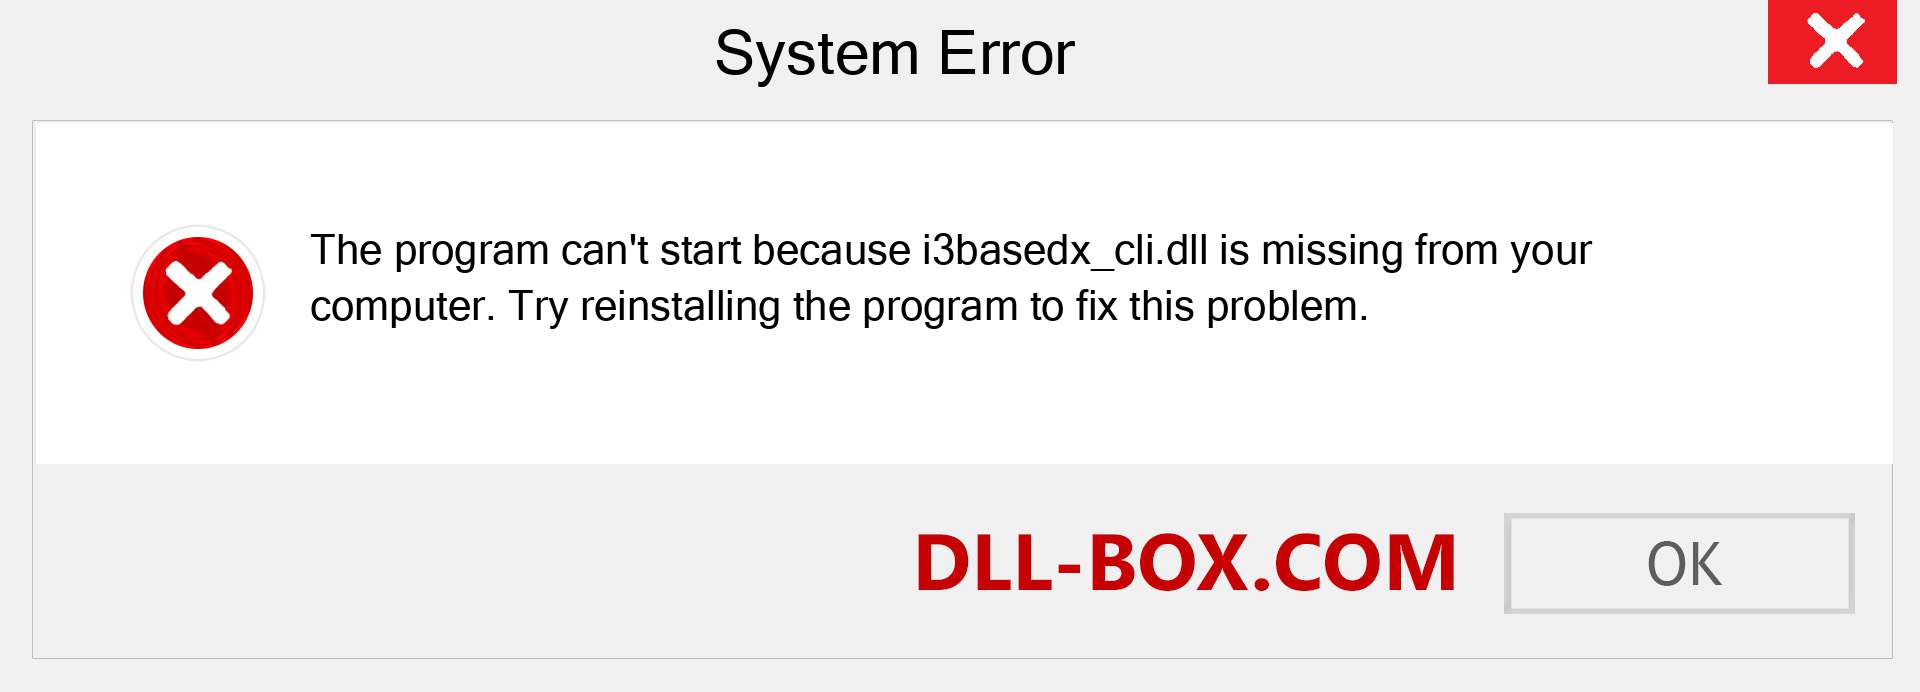  i3basedx_cli.dll file is missing?. Download for Windows 7, 8, 10 - Fix  i3basedx_cli dll Missing Error on Windows, photos, images